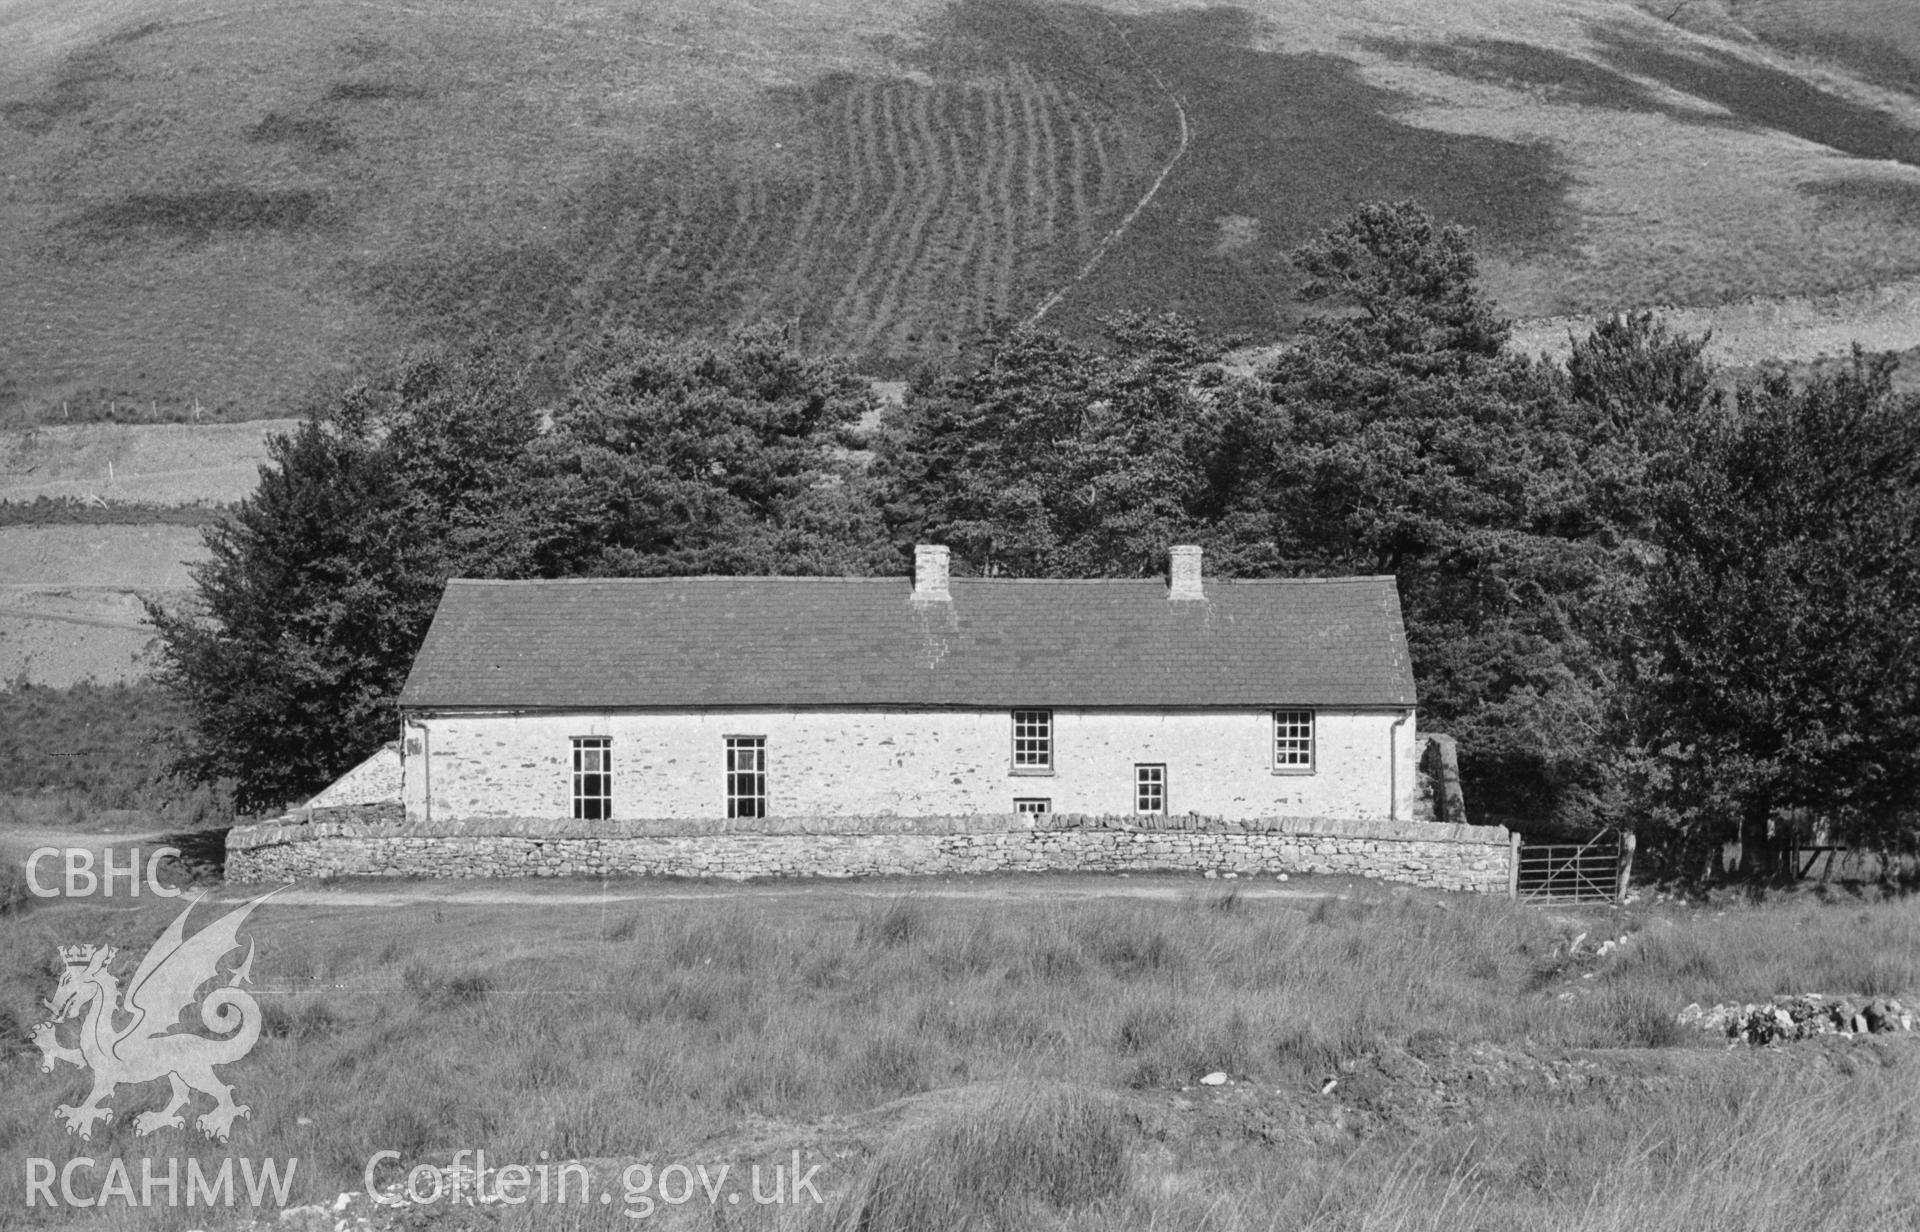 Digital copy of a black and white negative showing exterior rear elevation of Soar-y-Mynydd, Llanddewi Brefi. Photographed in September 1963 by Arthur O. Chater from Grid Reference SN 7844 5326, looking north east.